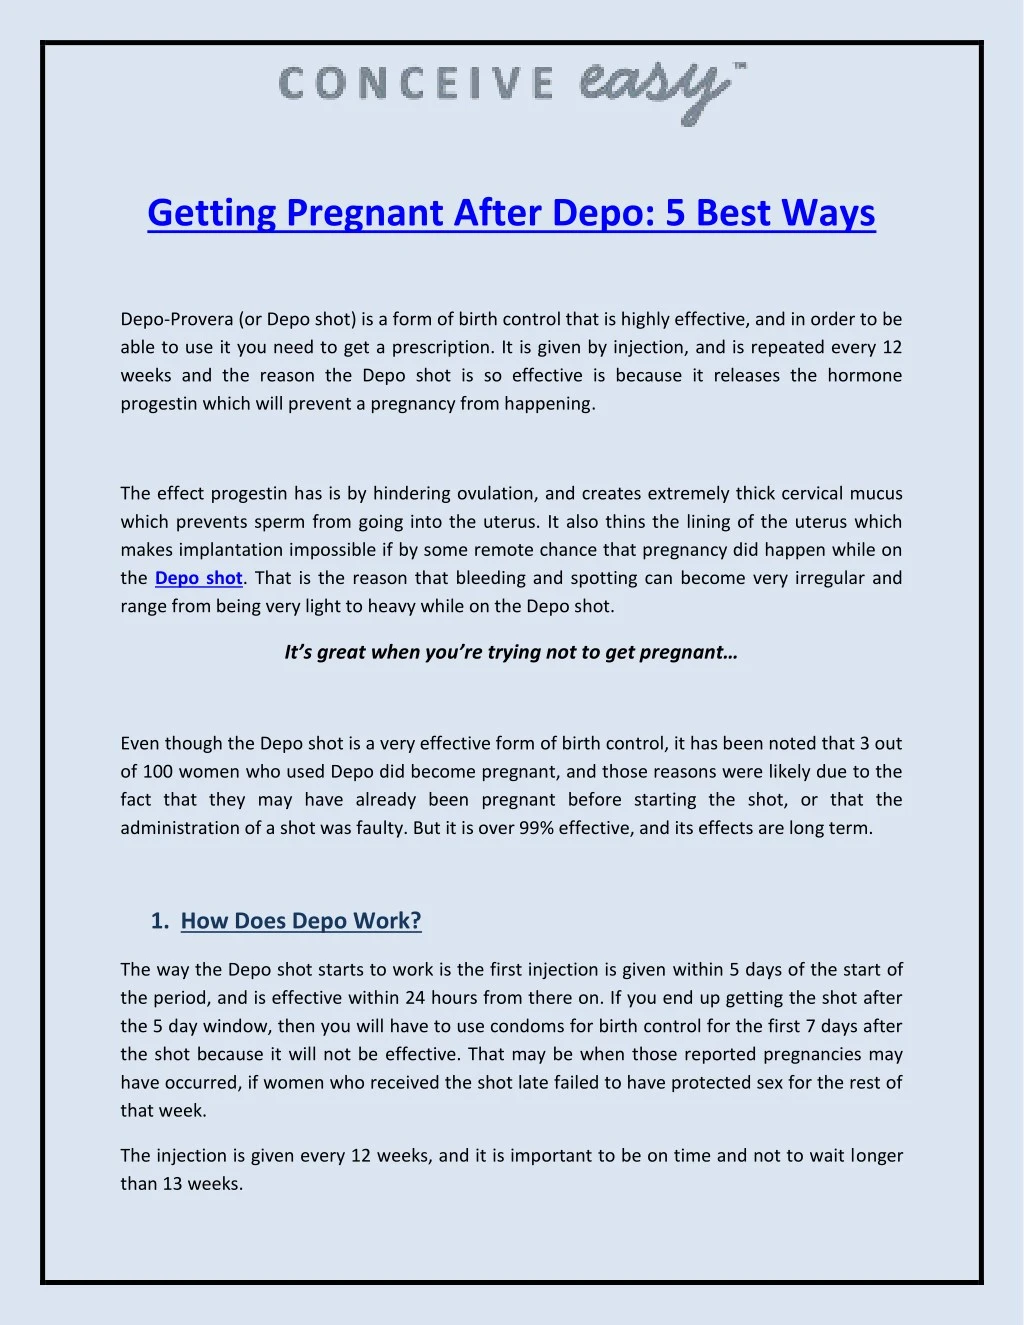 getting pregnant after depo 5 best ways